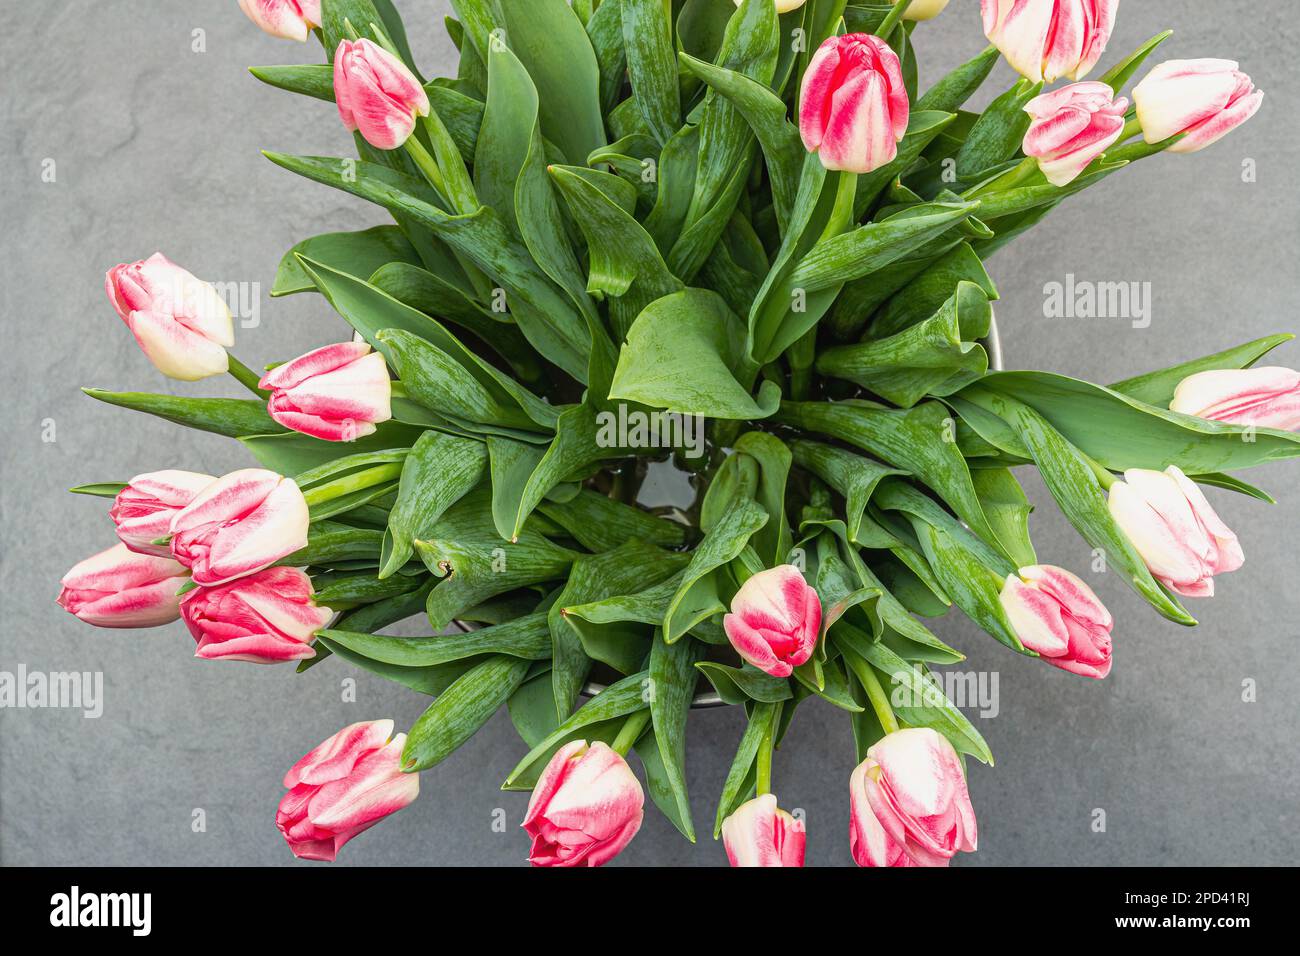 Bouquet of fresh pink tulips on gray stone concrete background. Festive concept for Mother's Day or Valentines Day. Greeting card, Easter flat lay, ha Stock Photo